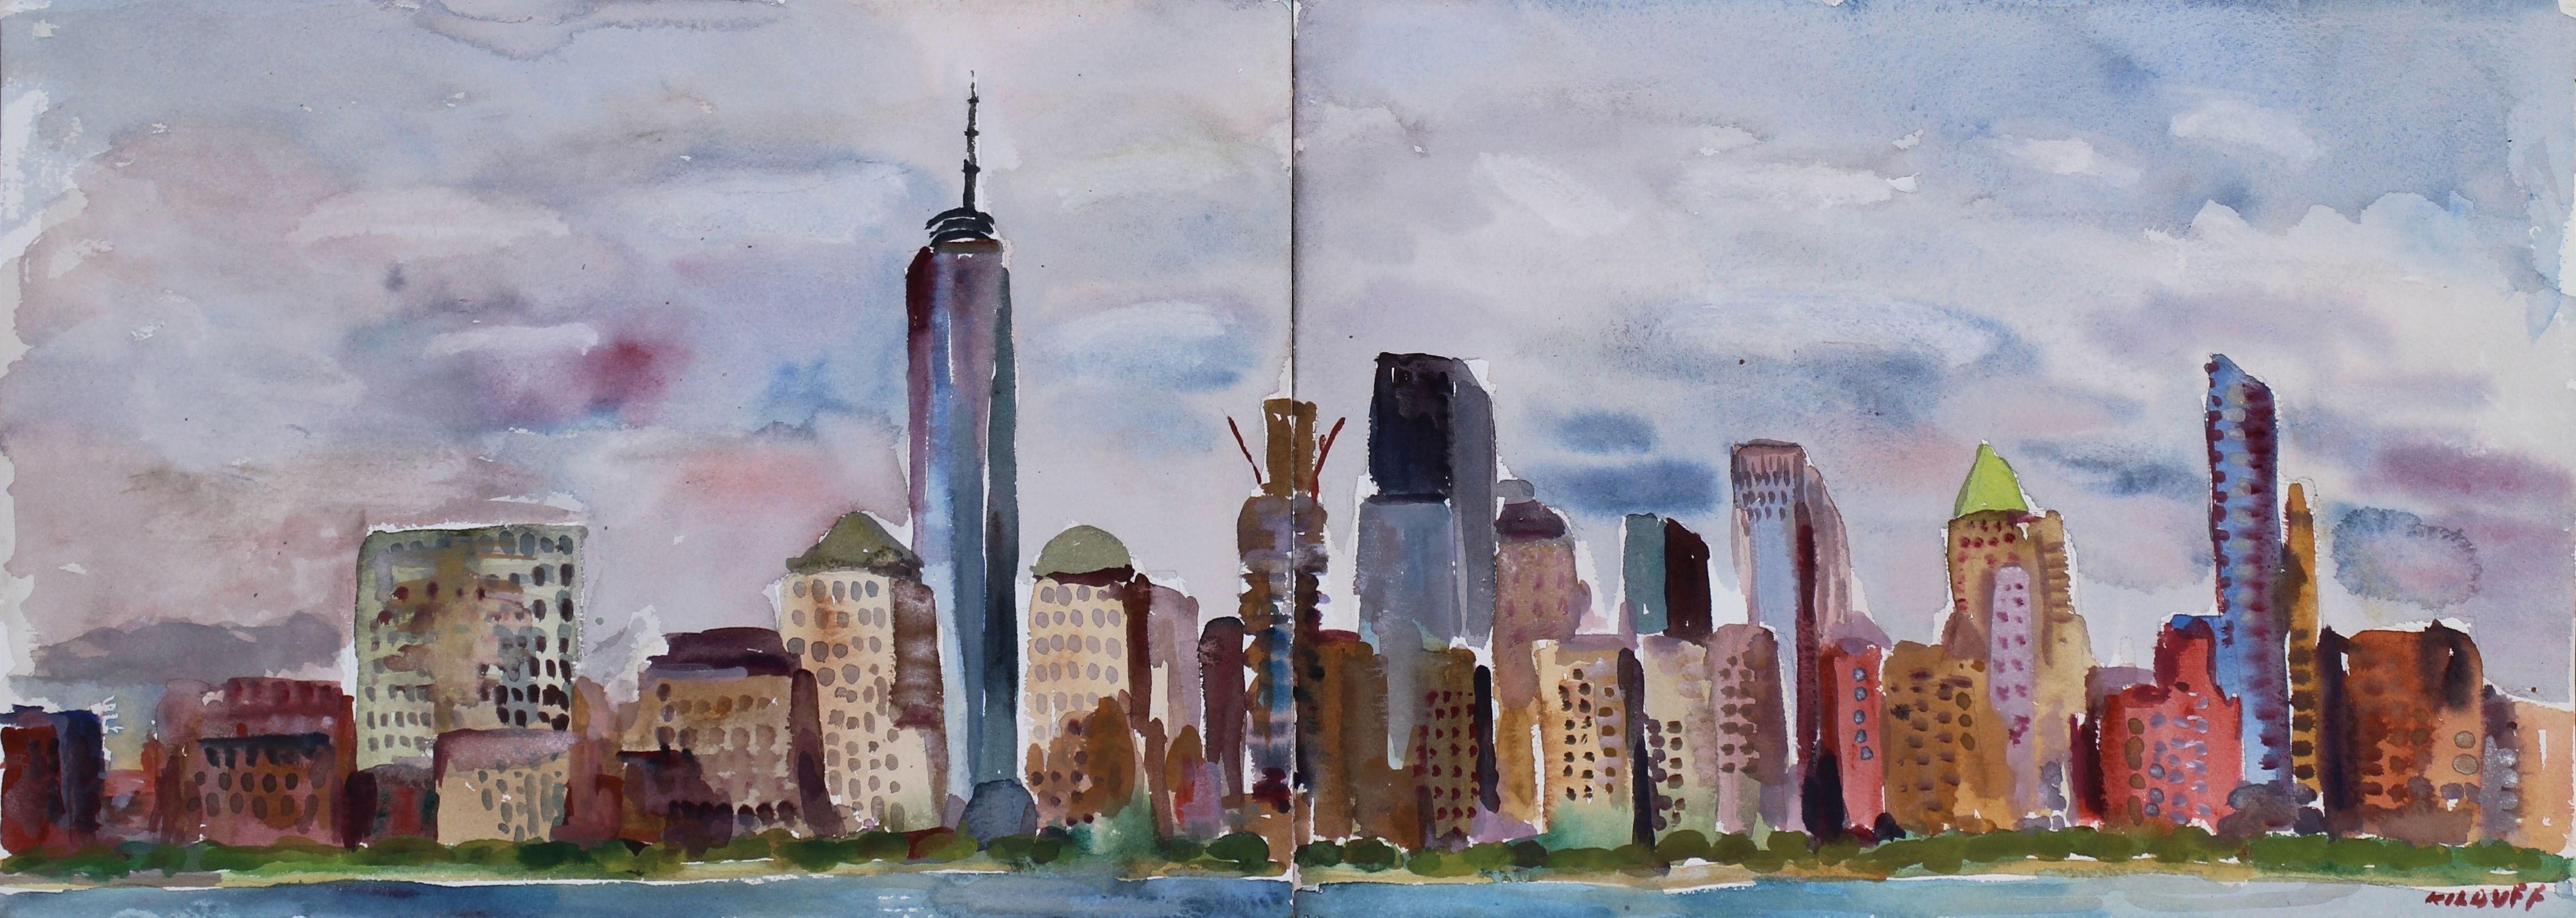 New York Skyline from Jersey City, Painting, Watercolor on Watercolor Paper - Art by John Kilduff